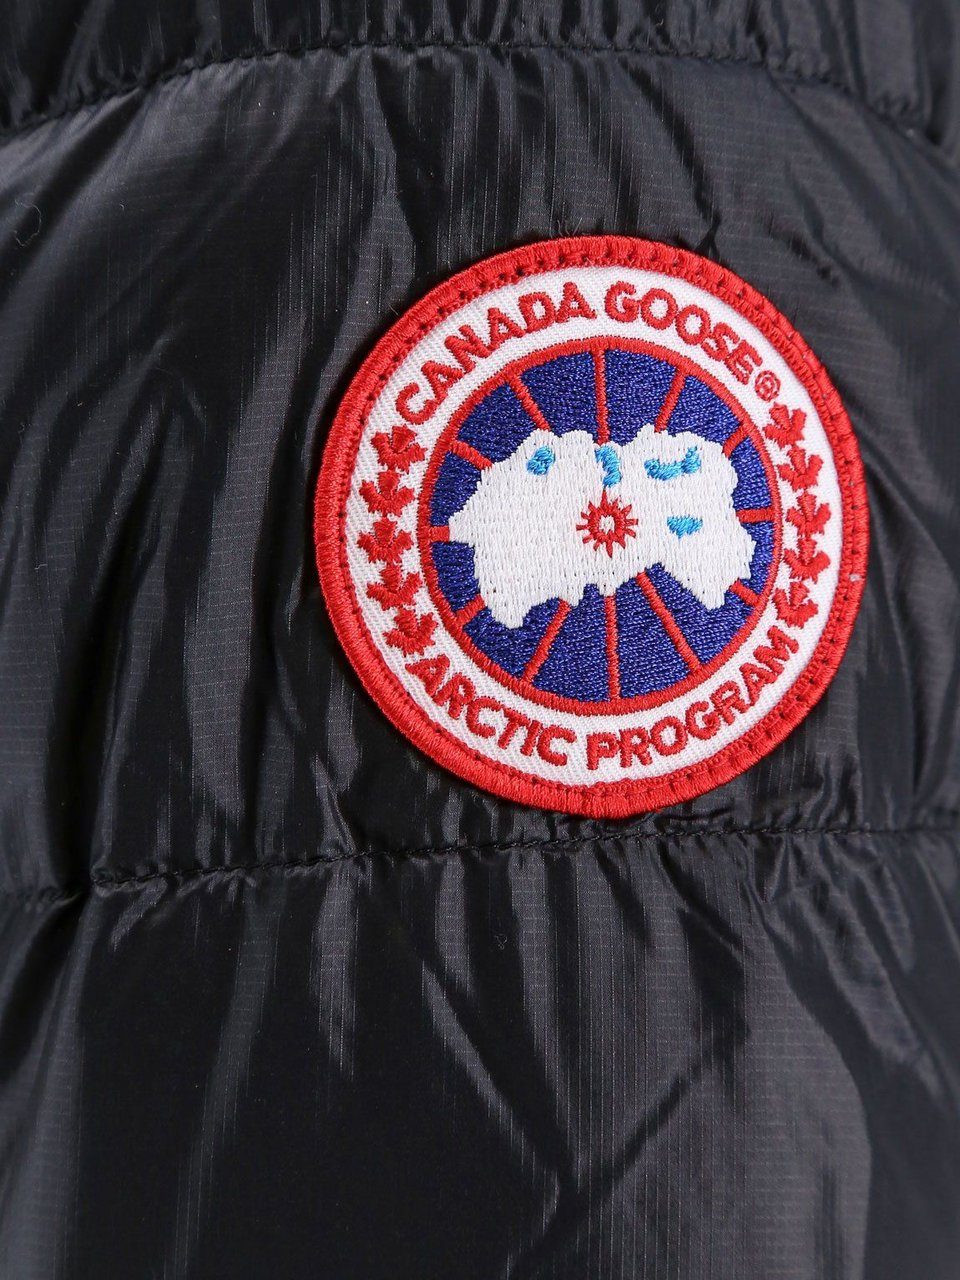 Canada Goose Padded and quilted jacket Zwart